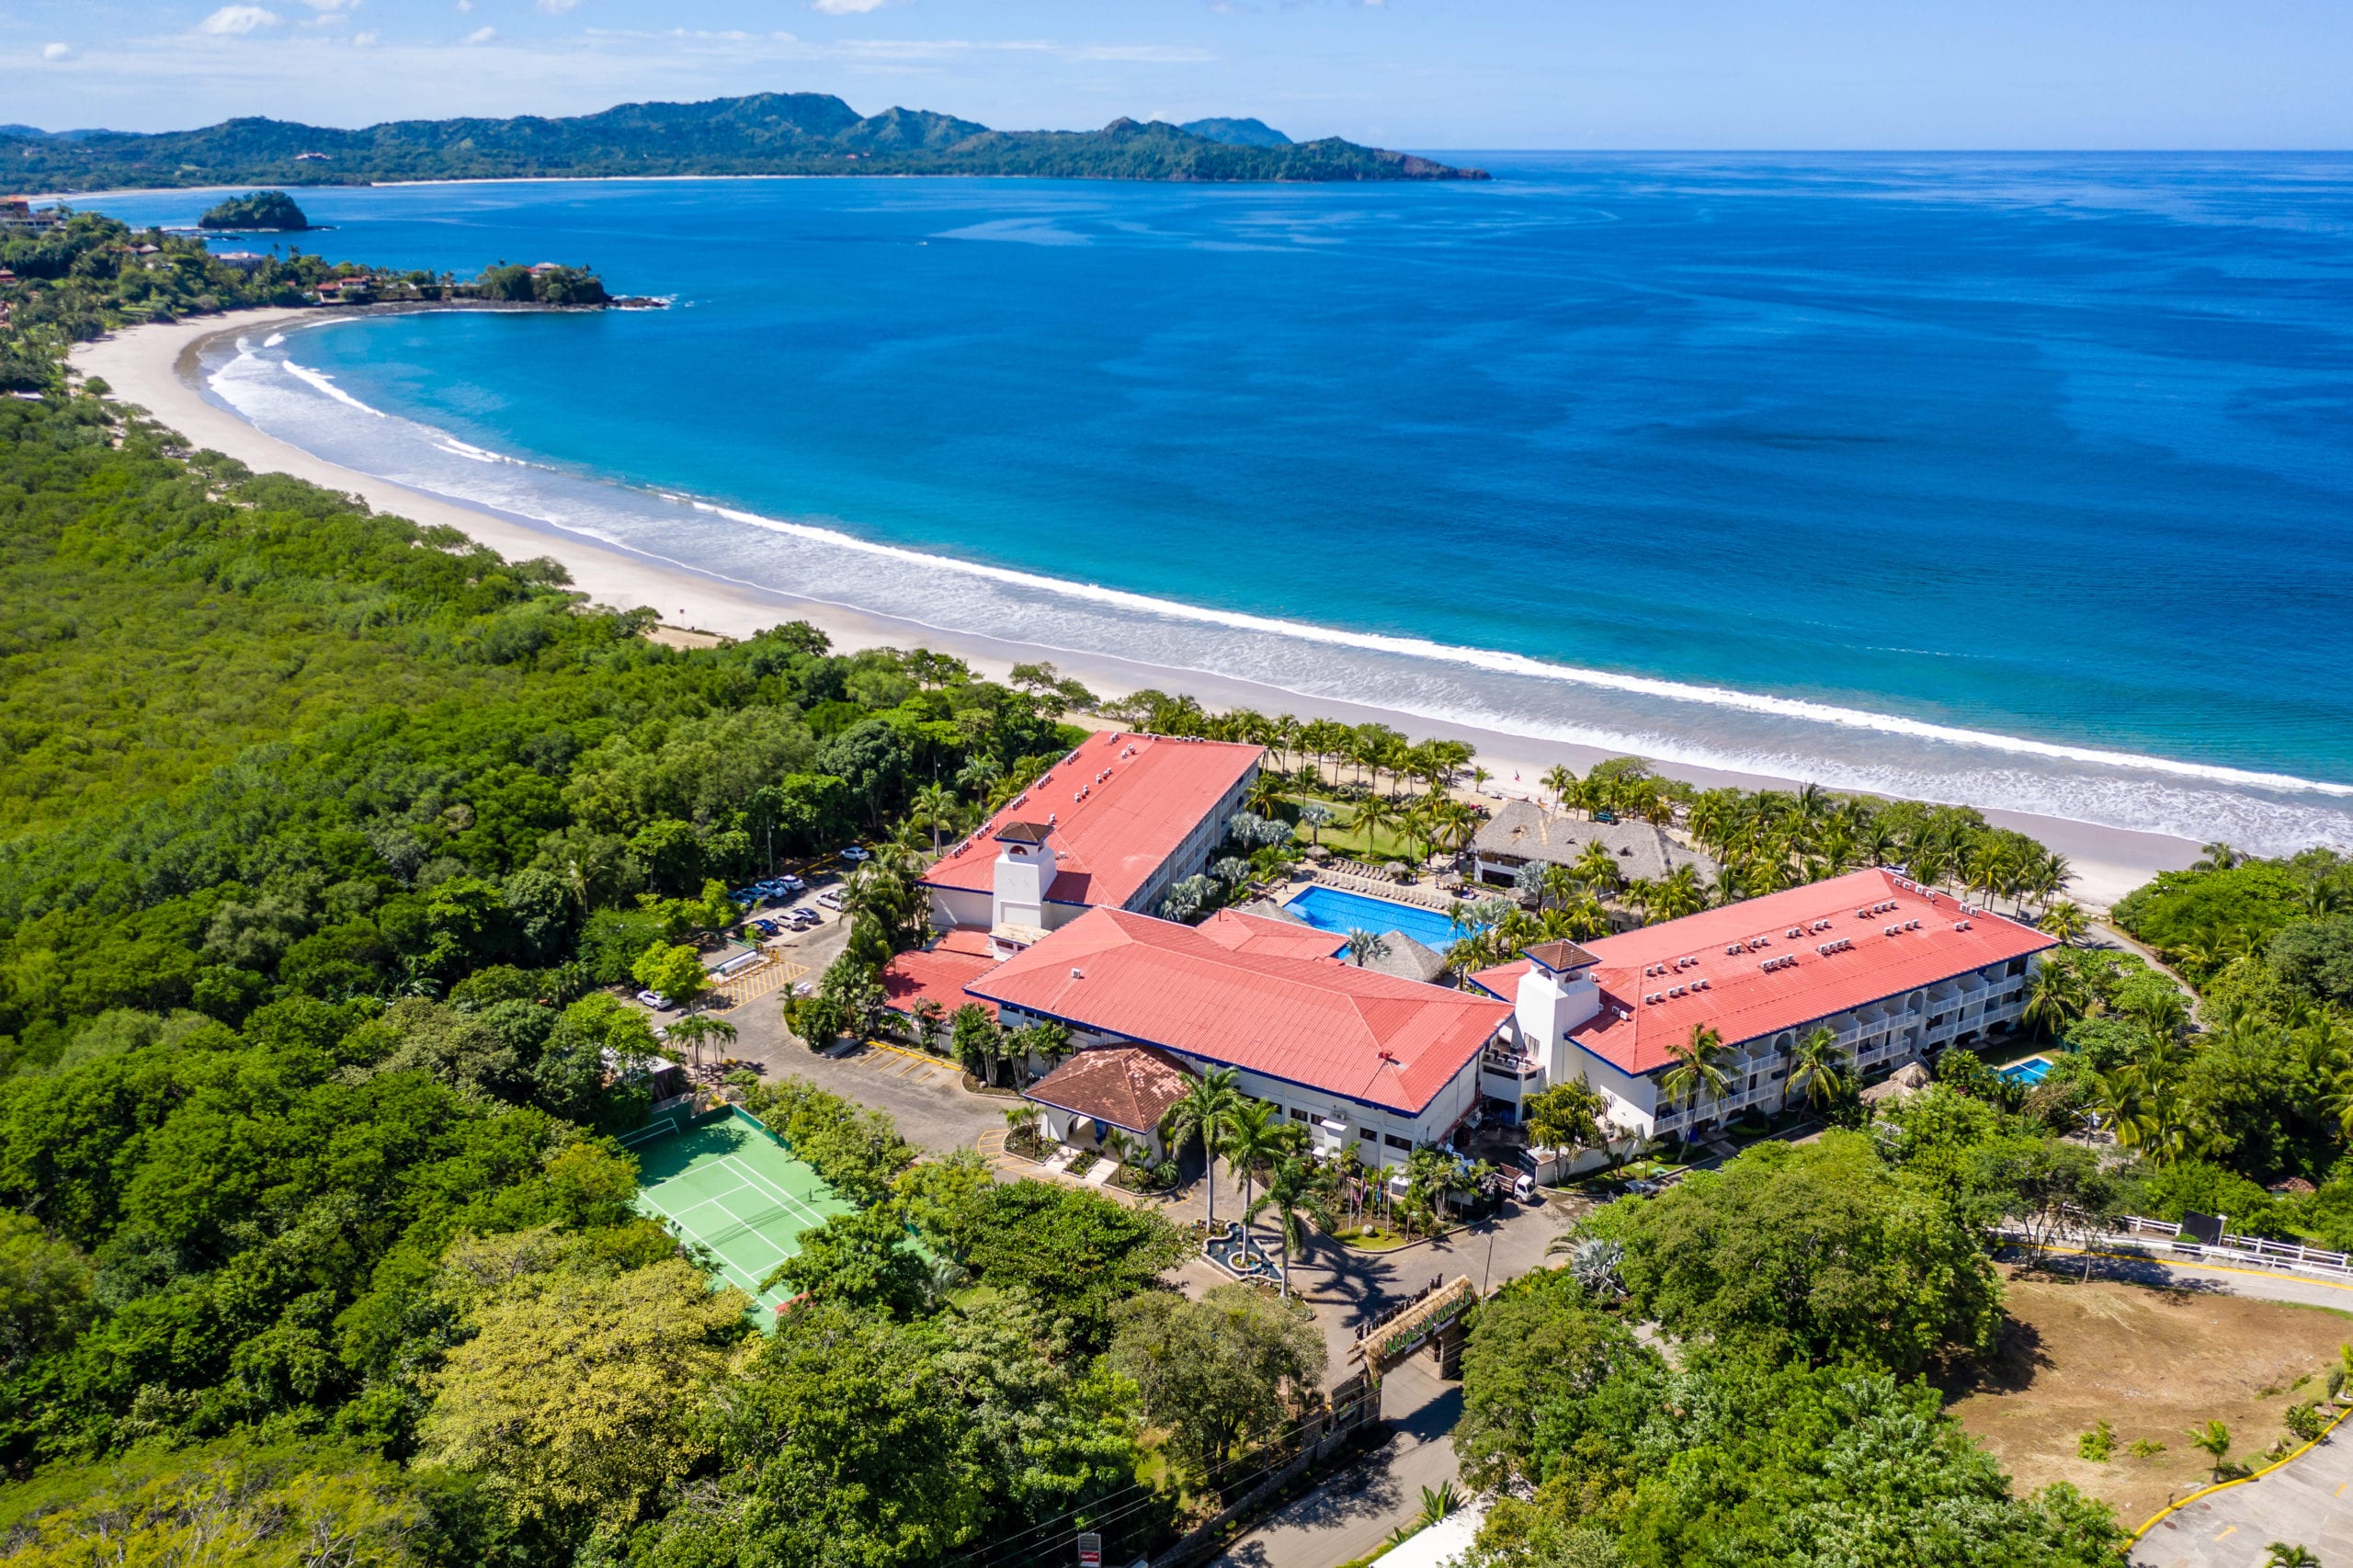 Costa Rica For Christmas 2022 The 10 Best Costa Rica All-Inclusive Resorts (2022) - Familyvacationist